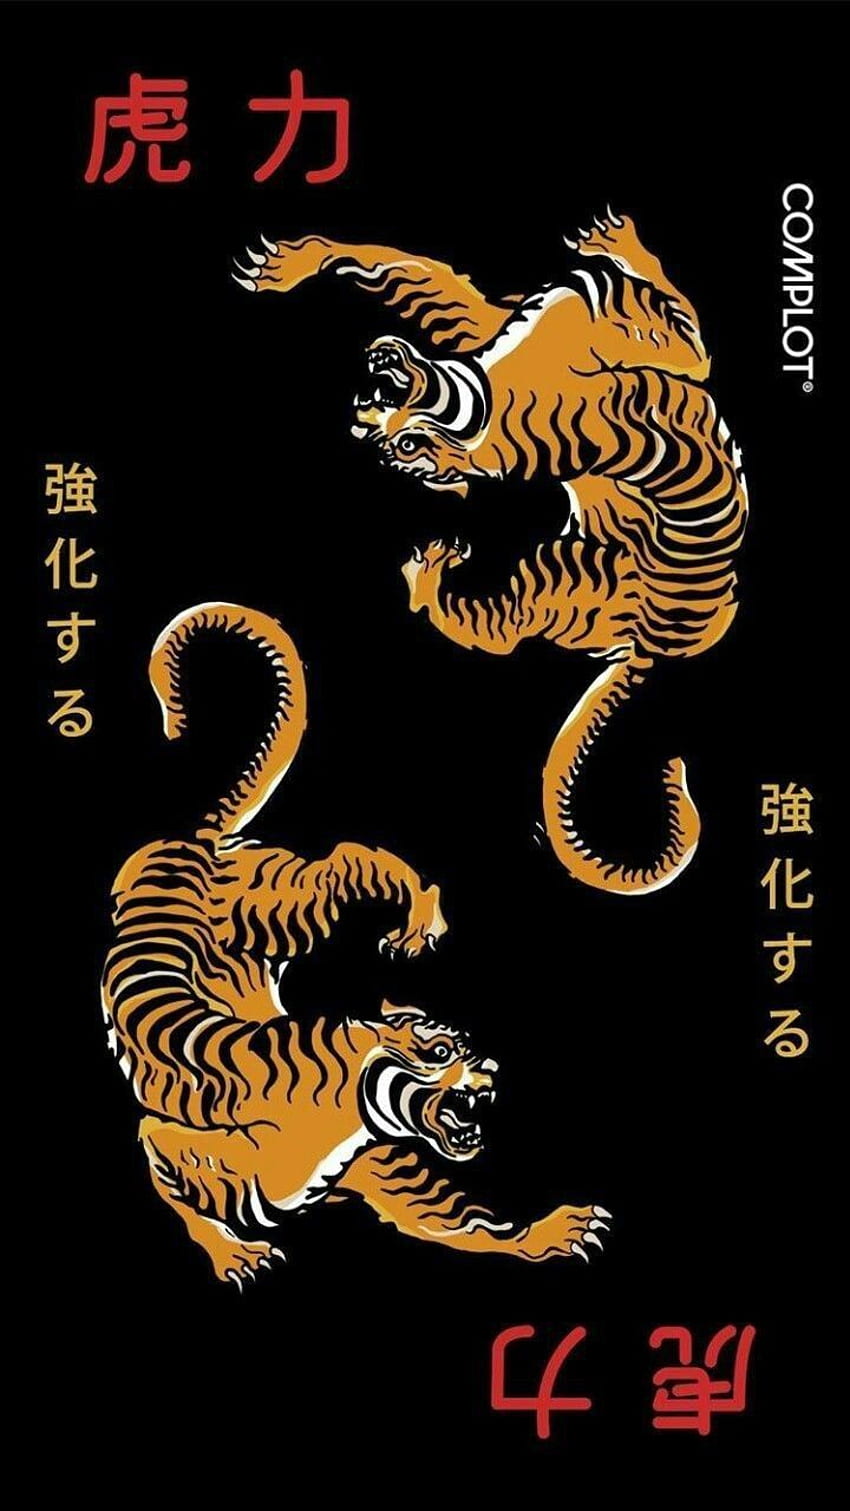 A black background with two orange and black tigers on it. - Tiger, dragon